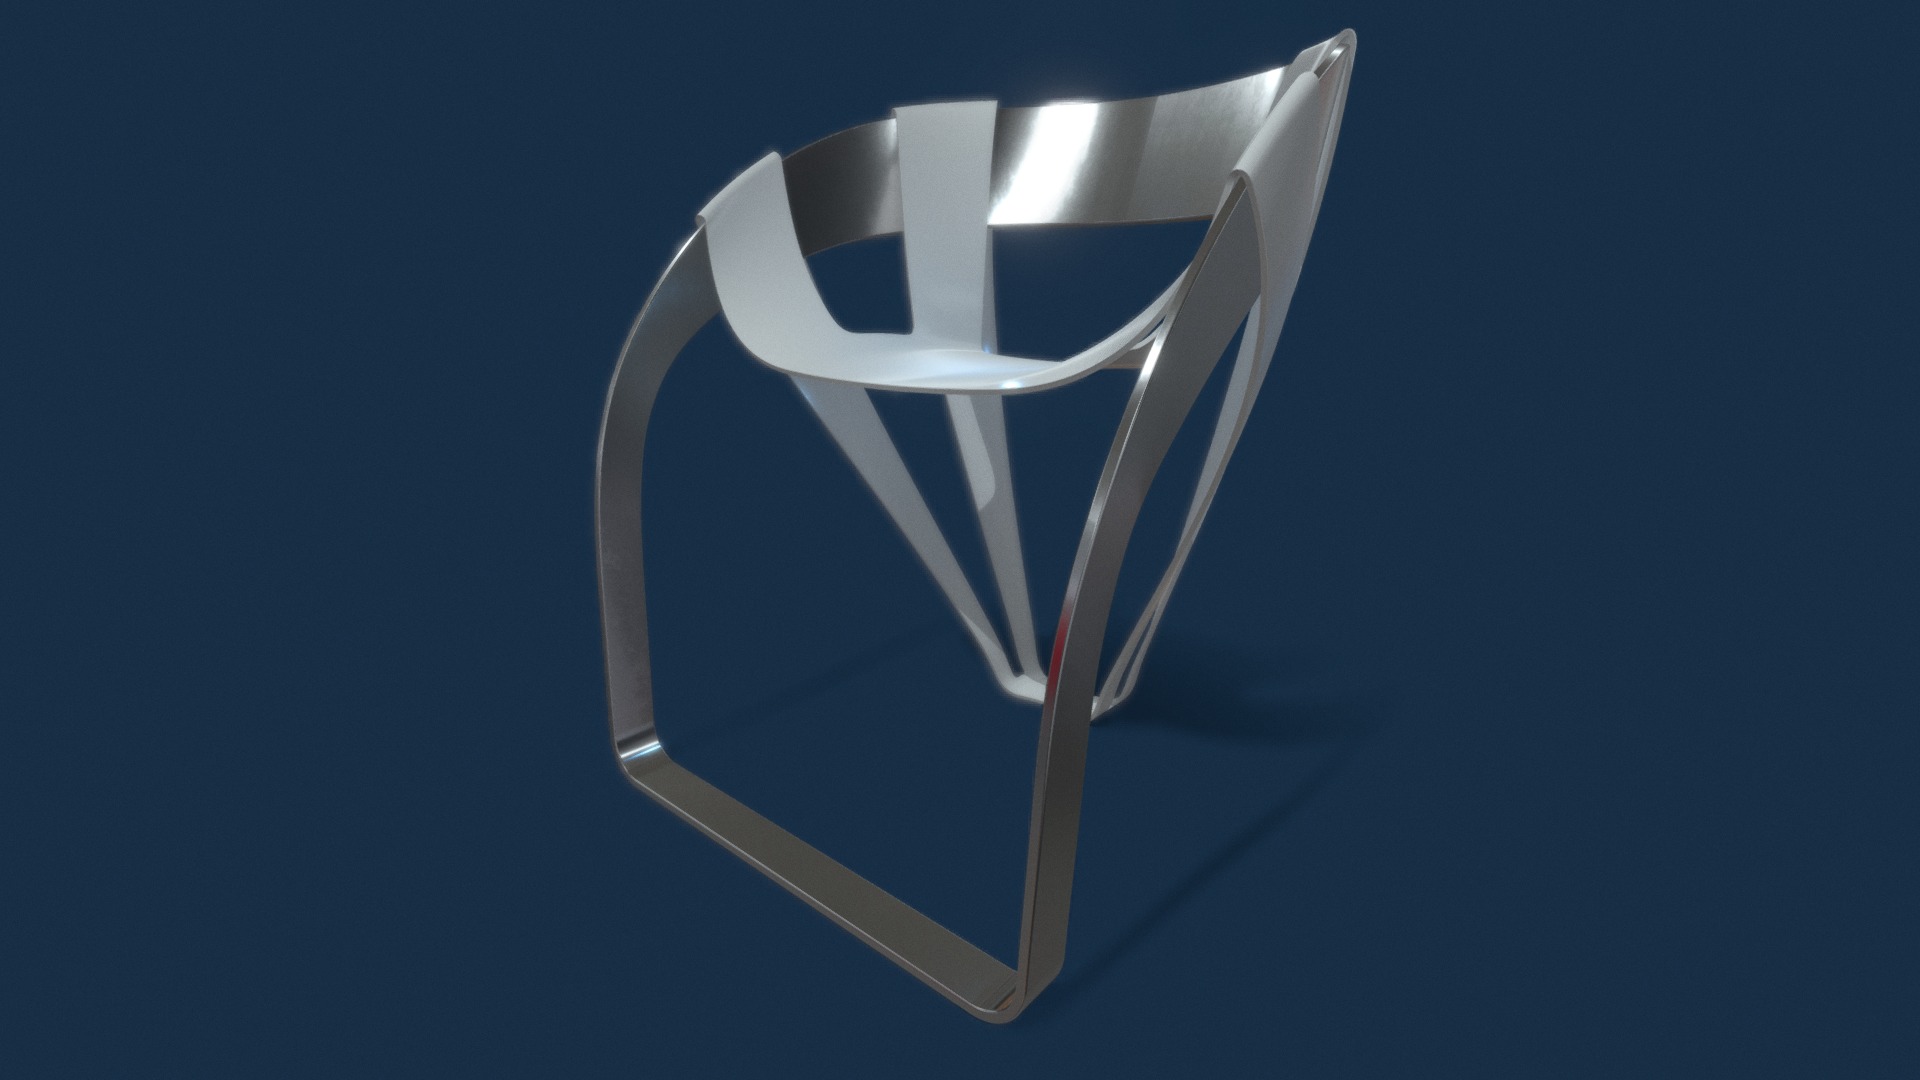 3D model Dry Leaf chair by Wilmer Chaca - This is a 3D model of the Dry Leaf chair by Wilmer Chaca. The 3D model is about a white and blue logo.